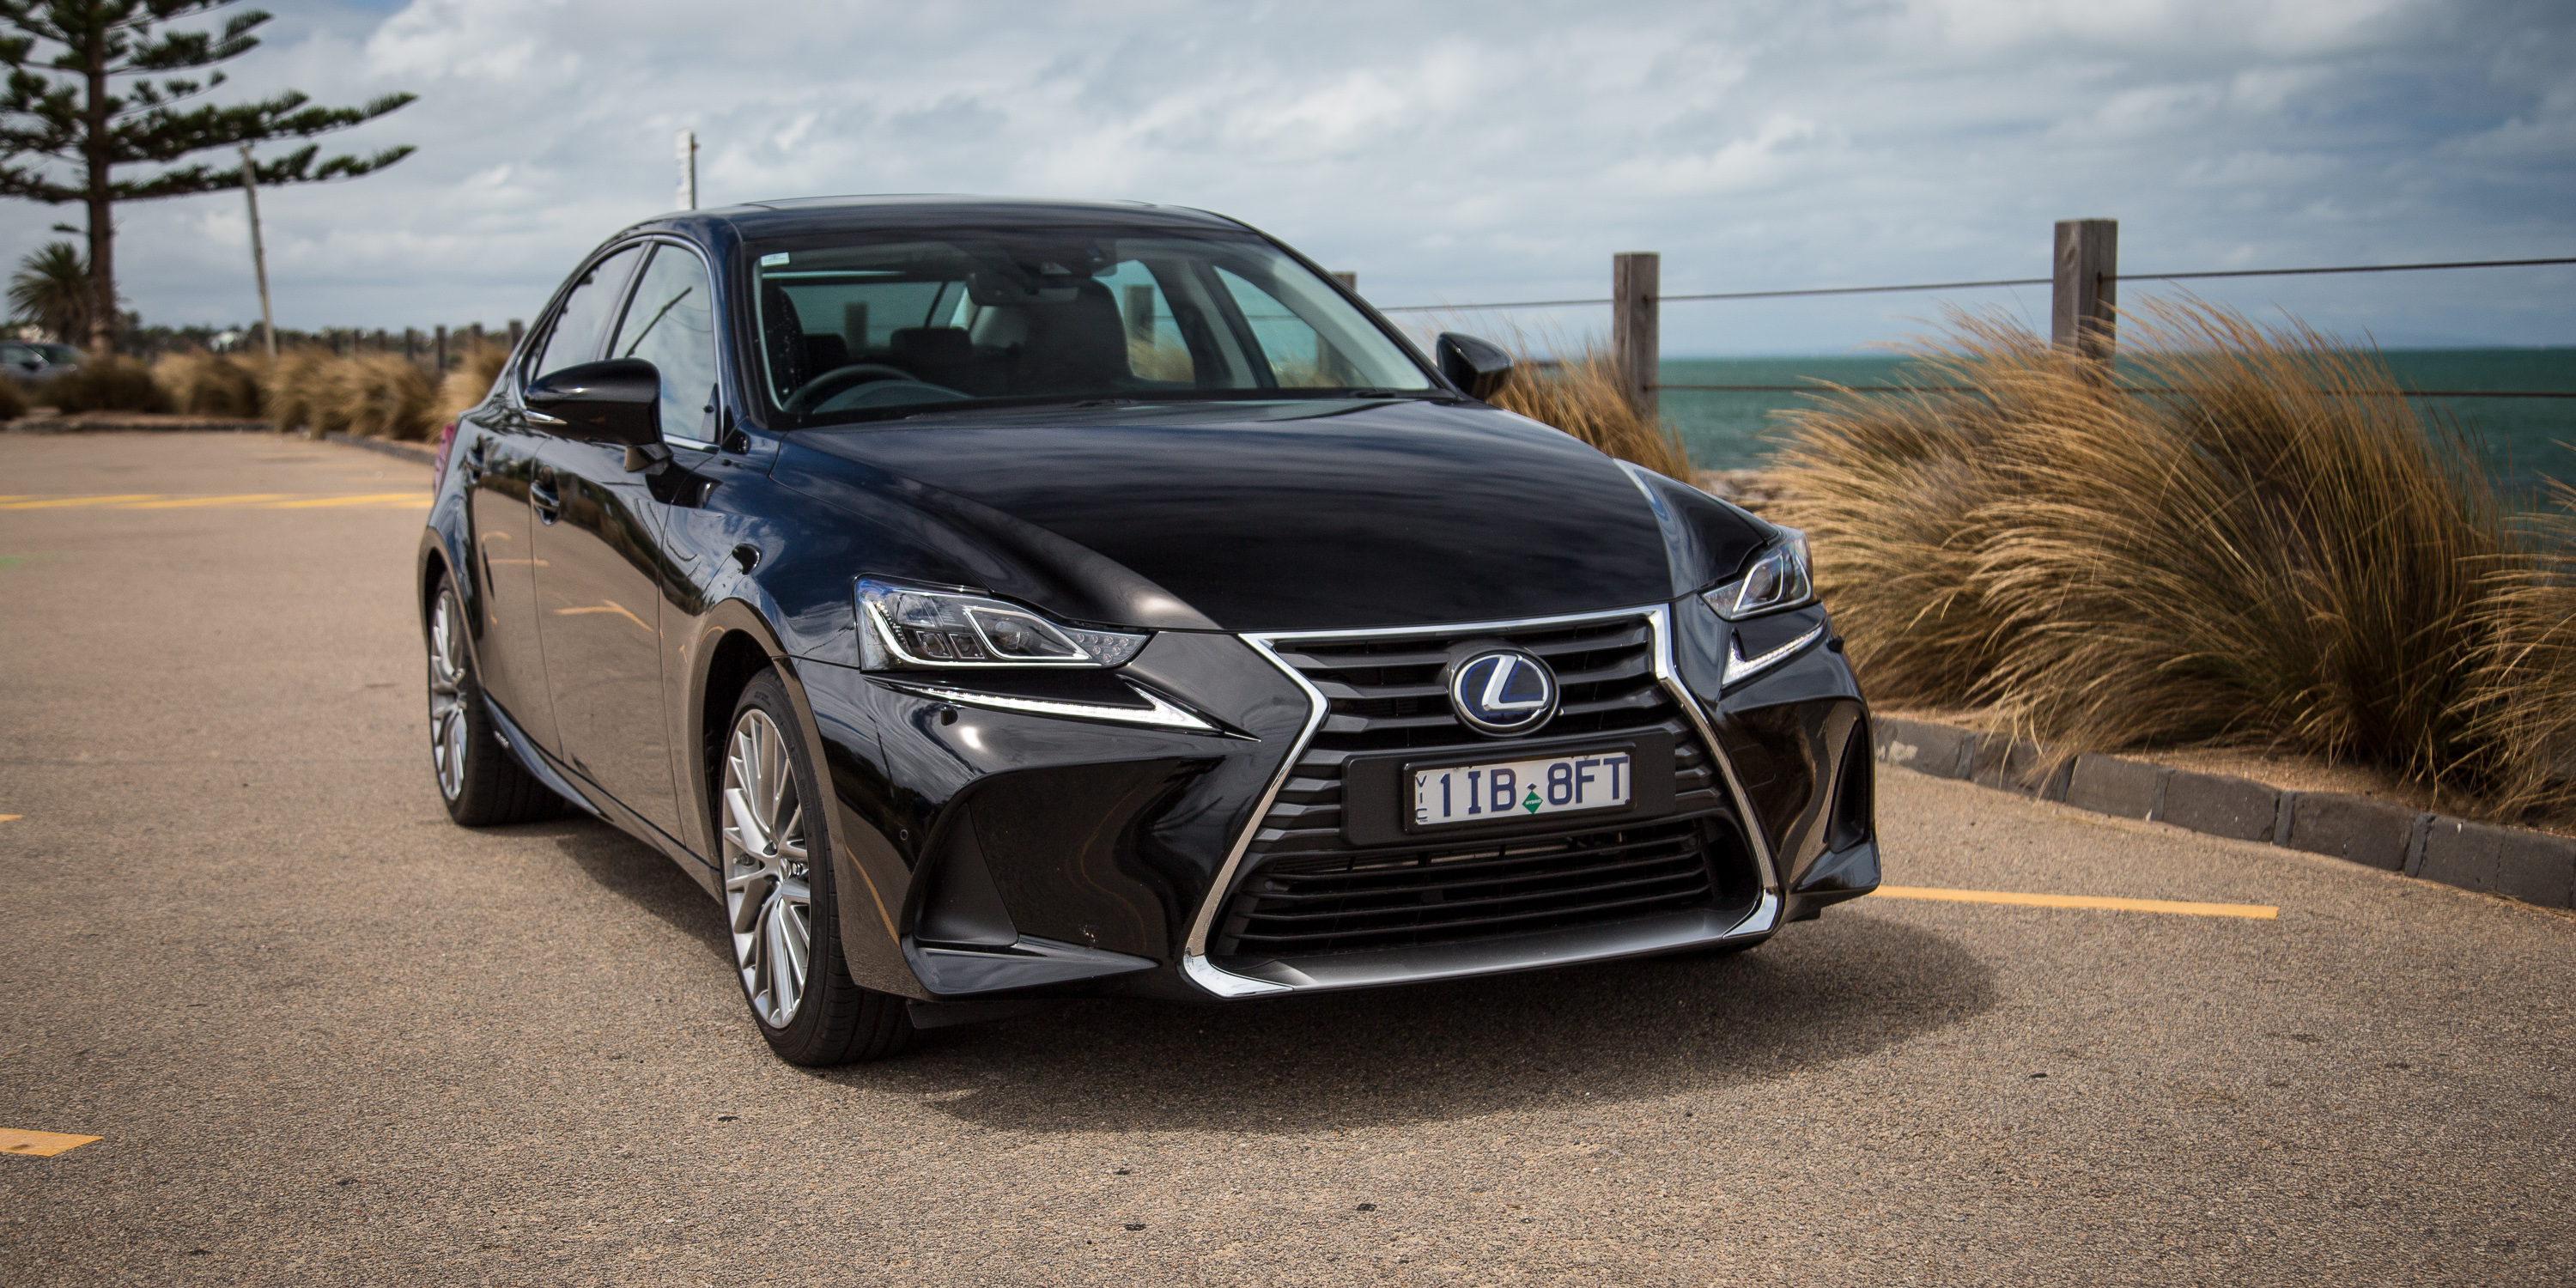 2017 Lexus IS300h Sport Luxury review | CarAdvice